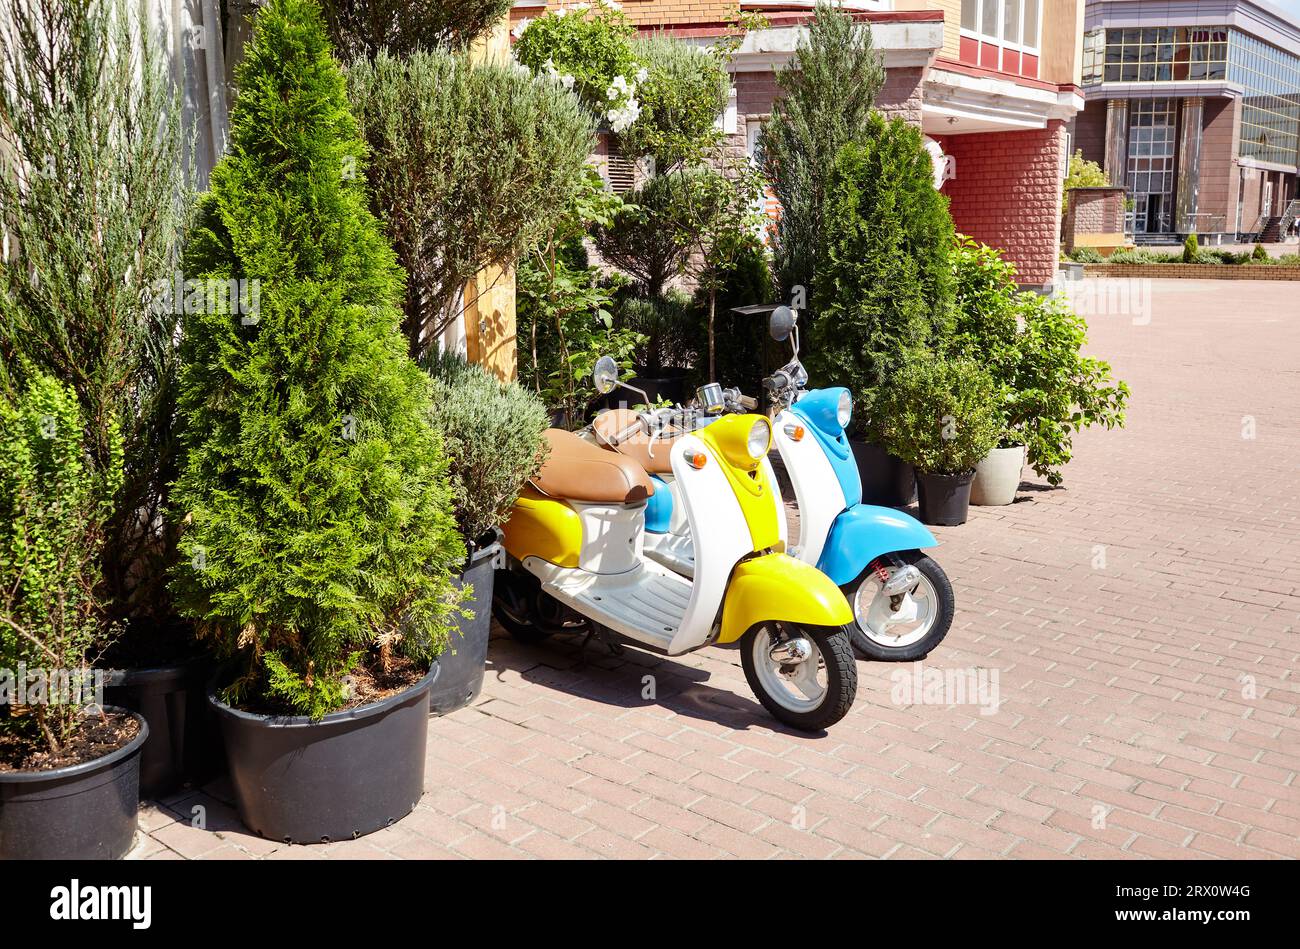 Small city cafe with lush vegetation in Kyiv, Ukraine. Two retro mopeds for delivery service in front Stock Photo